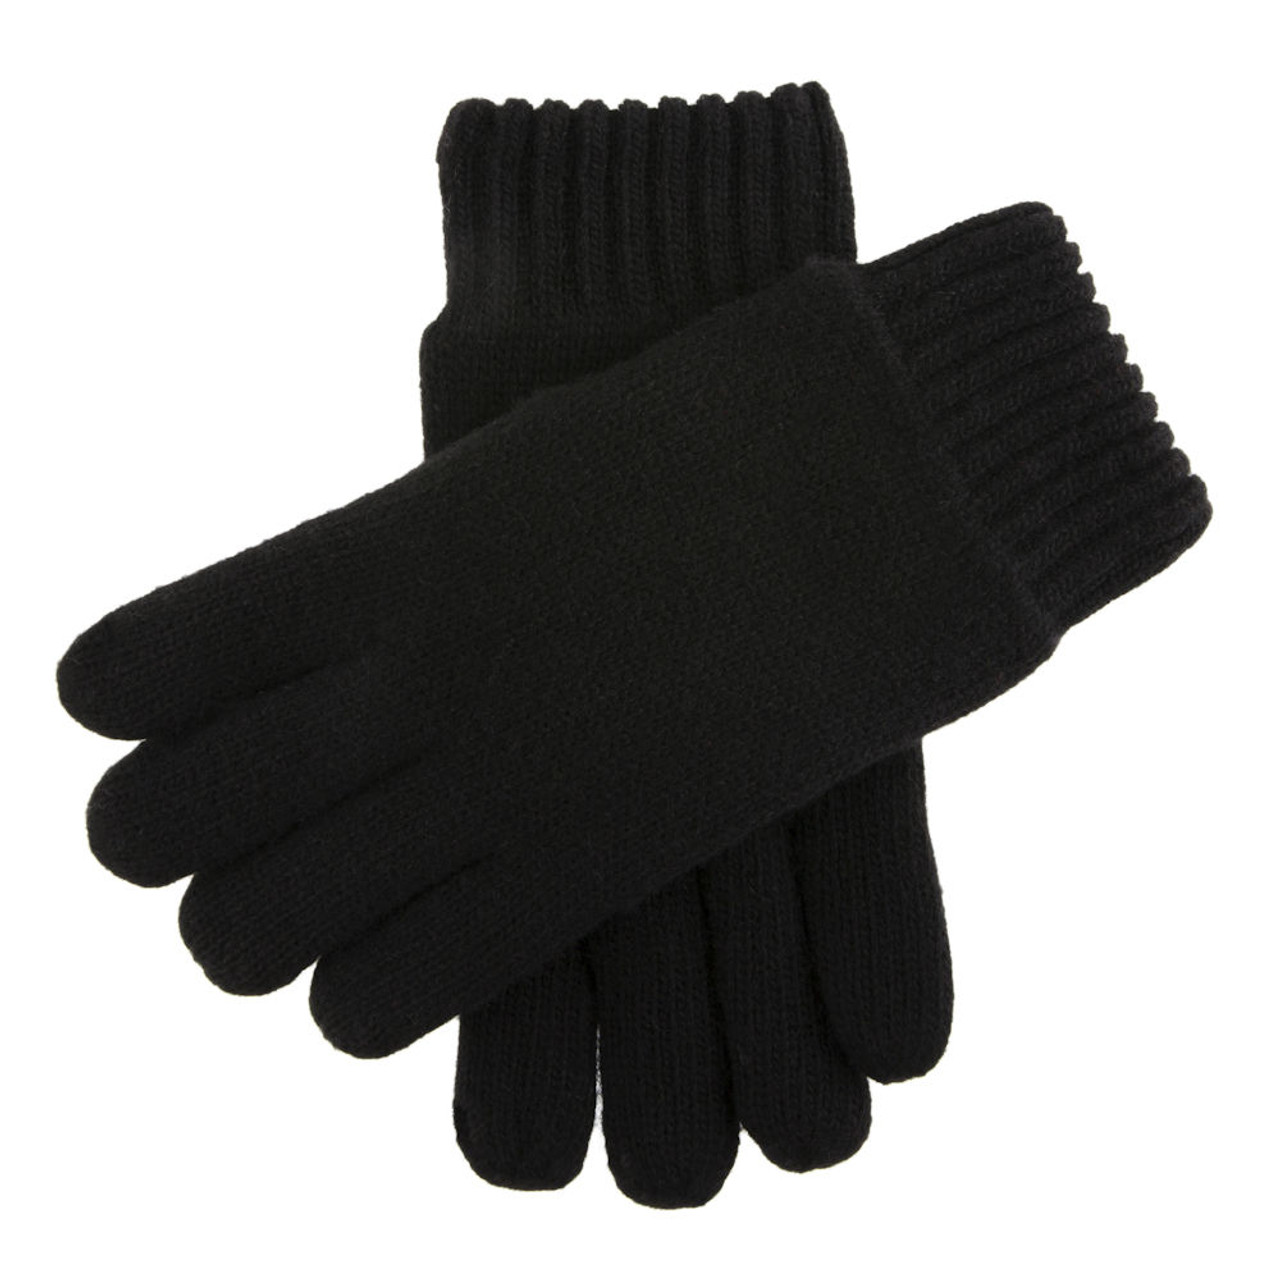 Black Wool Gloves With Thinsulate Lining | Dents | Retro Star London